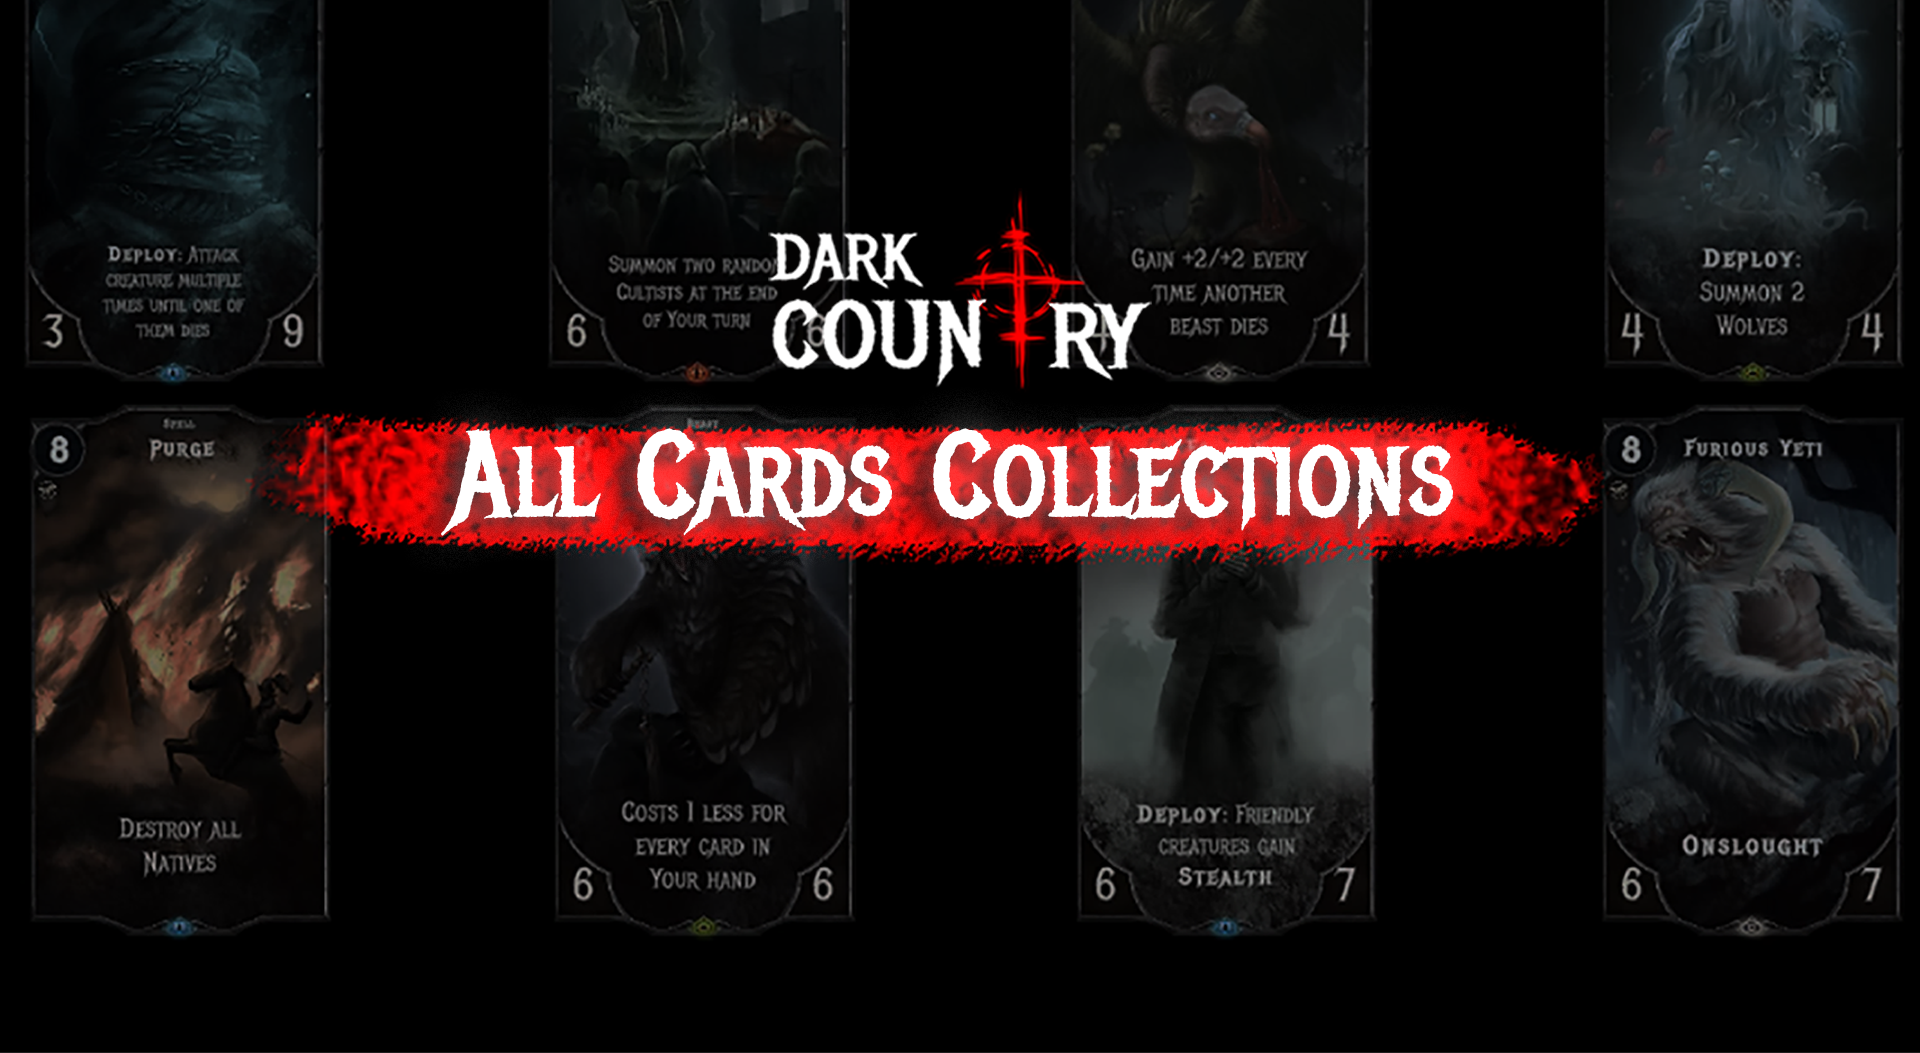 All Cards Collections!